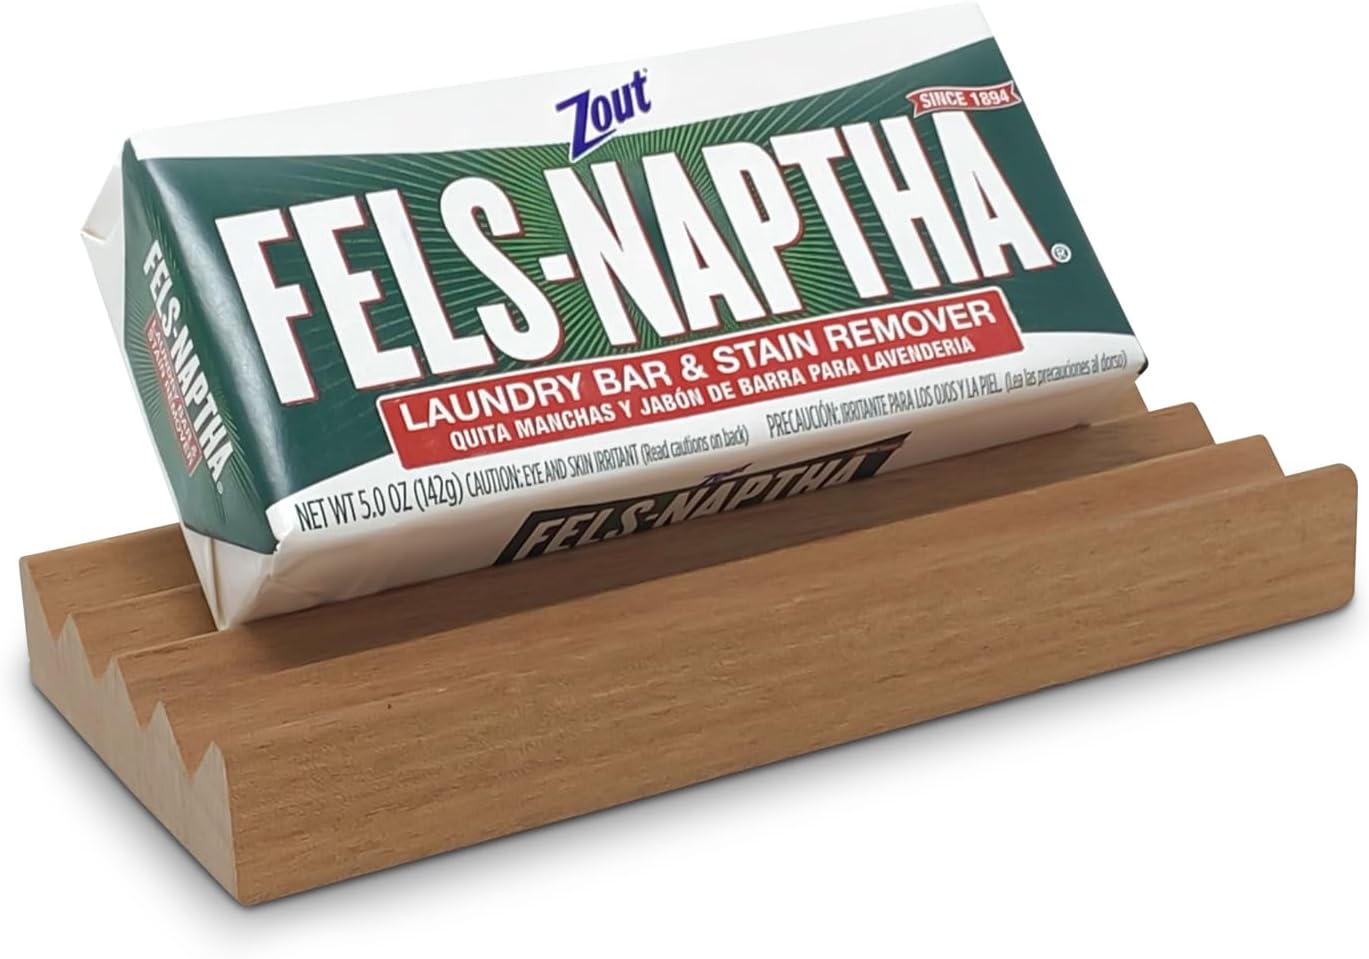 Fels Naptha Laundry Detergent Bar - 5 Ounce Fels Naptha Laundry Bar Soap and Stain Remover Bundle. (Redwood Style) Get the Ultimate Accessory to your Fels Naptha Soap Bars